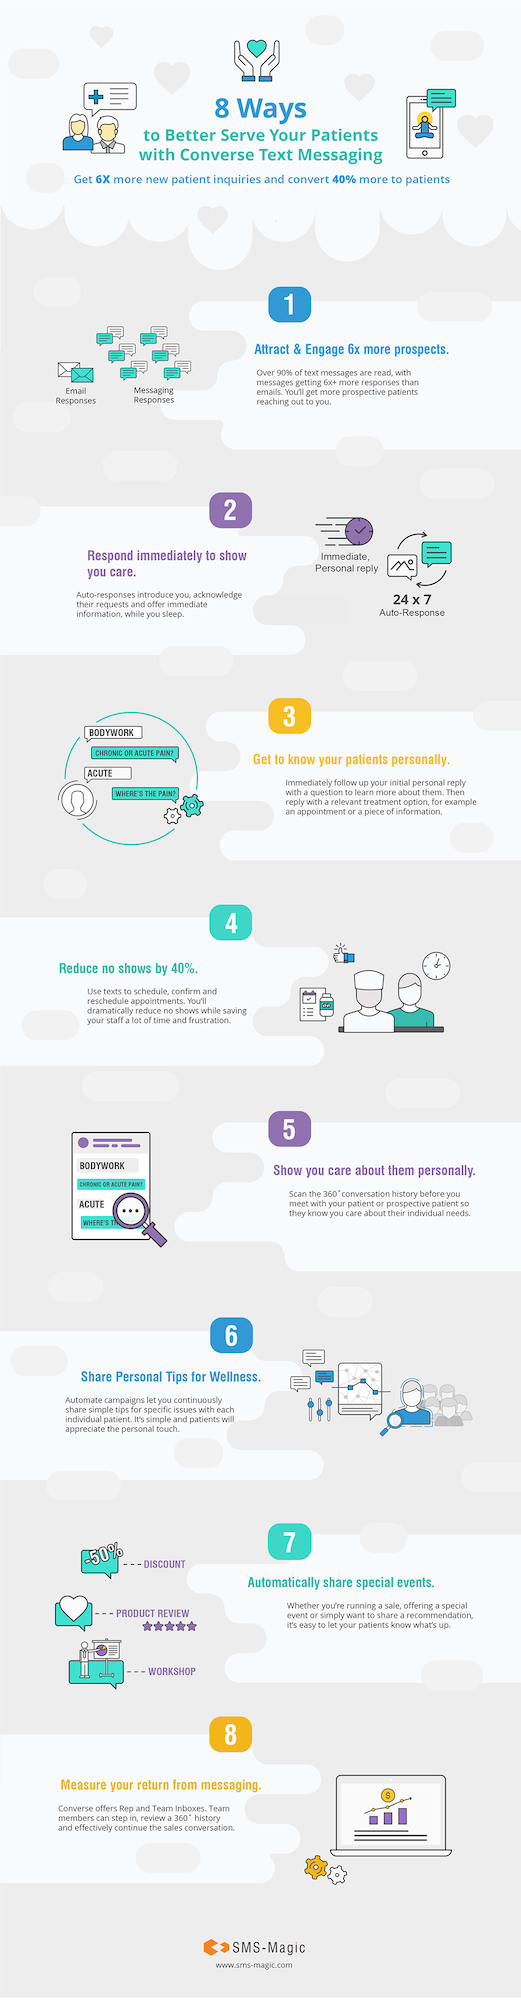 Infographic - 8 Ways To Better Serve Patients With Text Messaging For Wellness